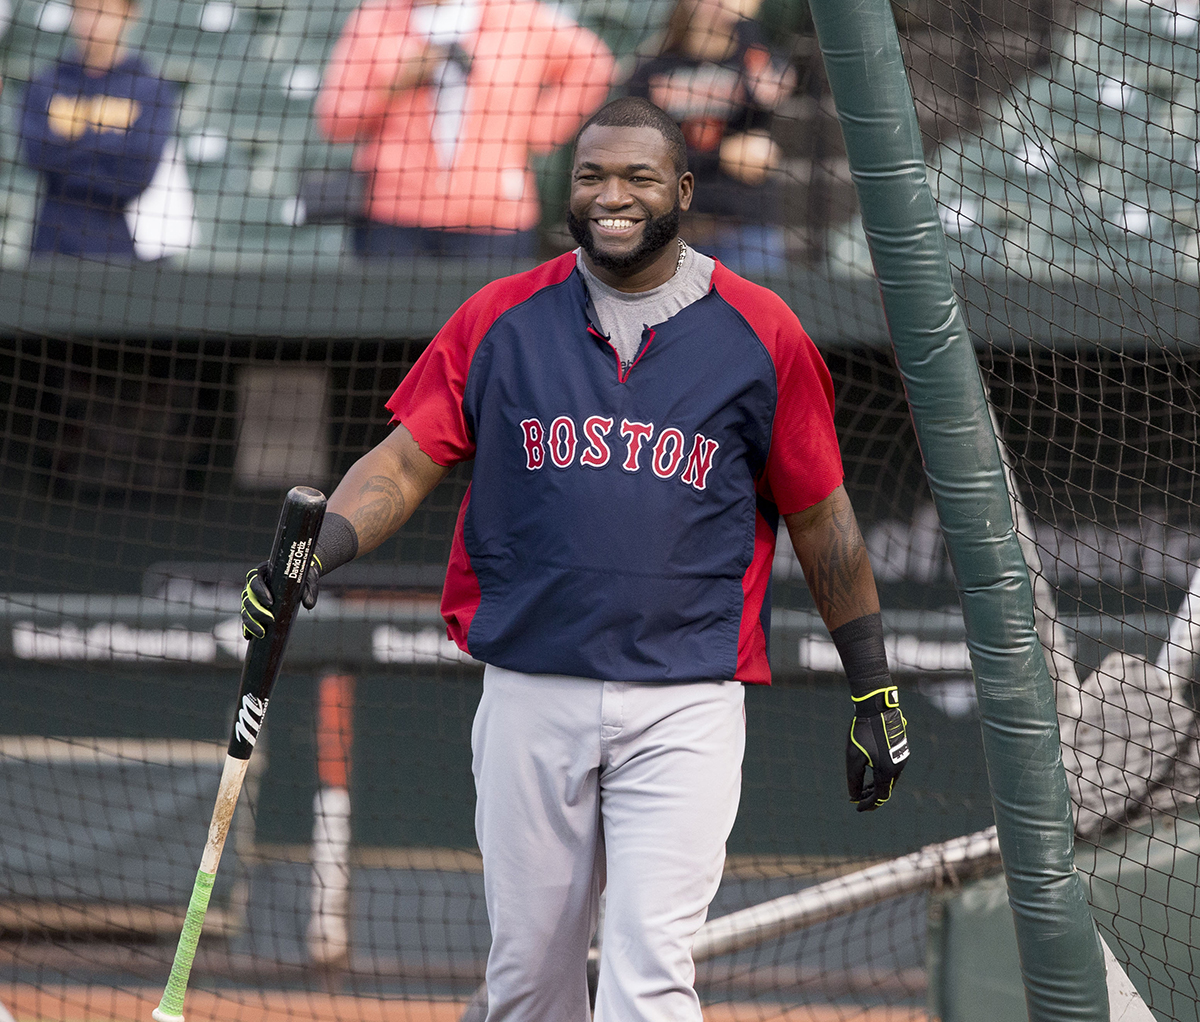 David Ortiz by Keith Allison on Flickr/Creative Commons